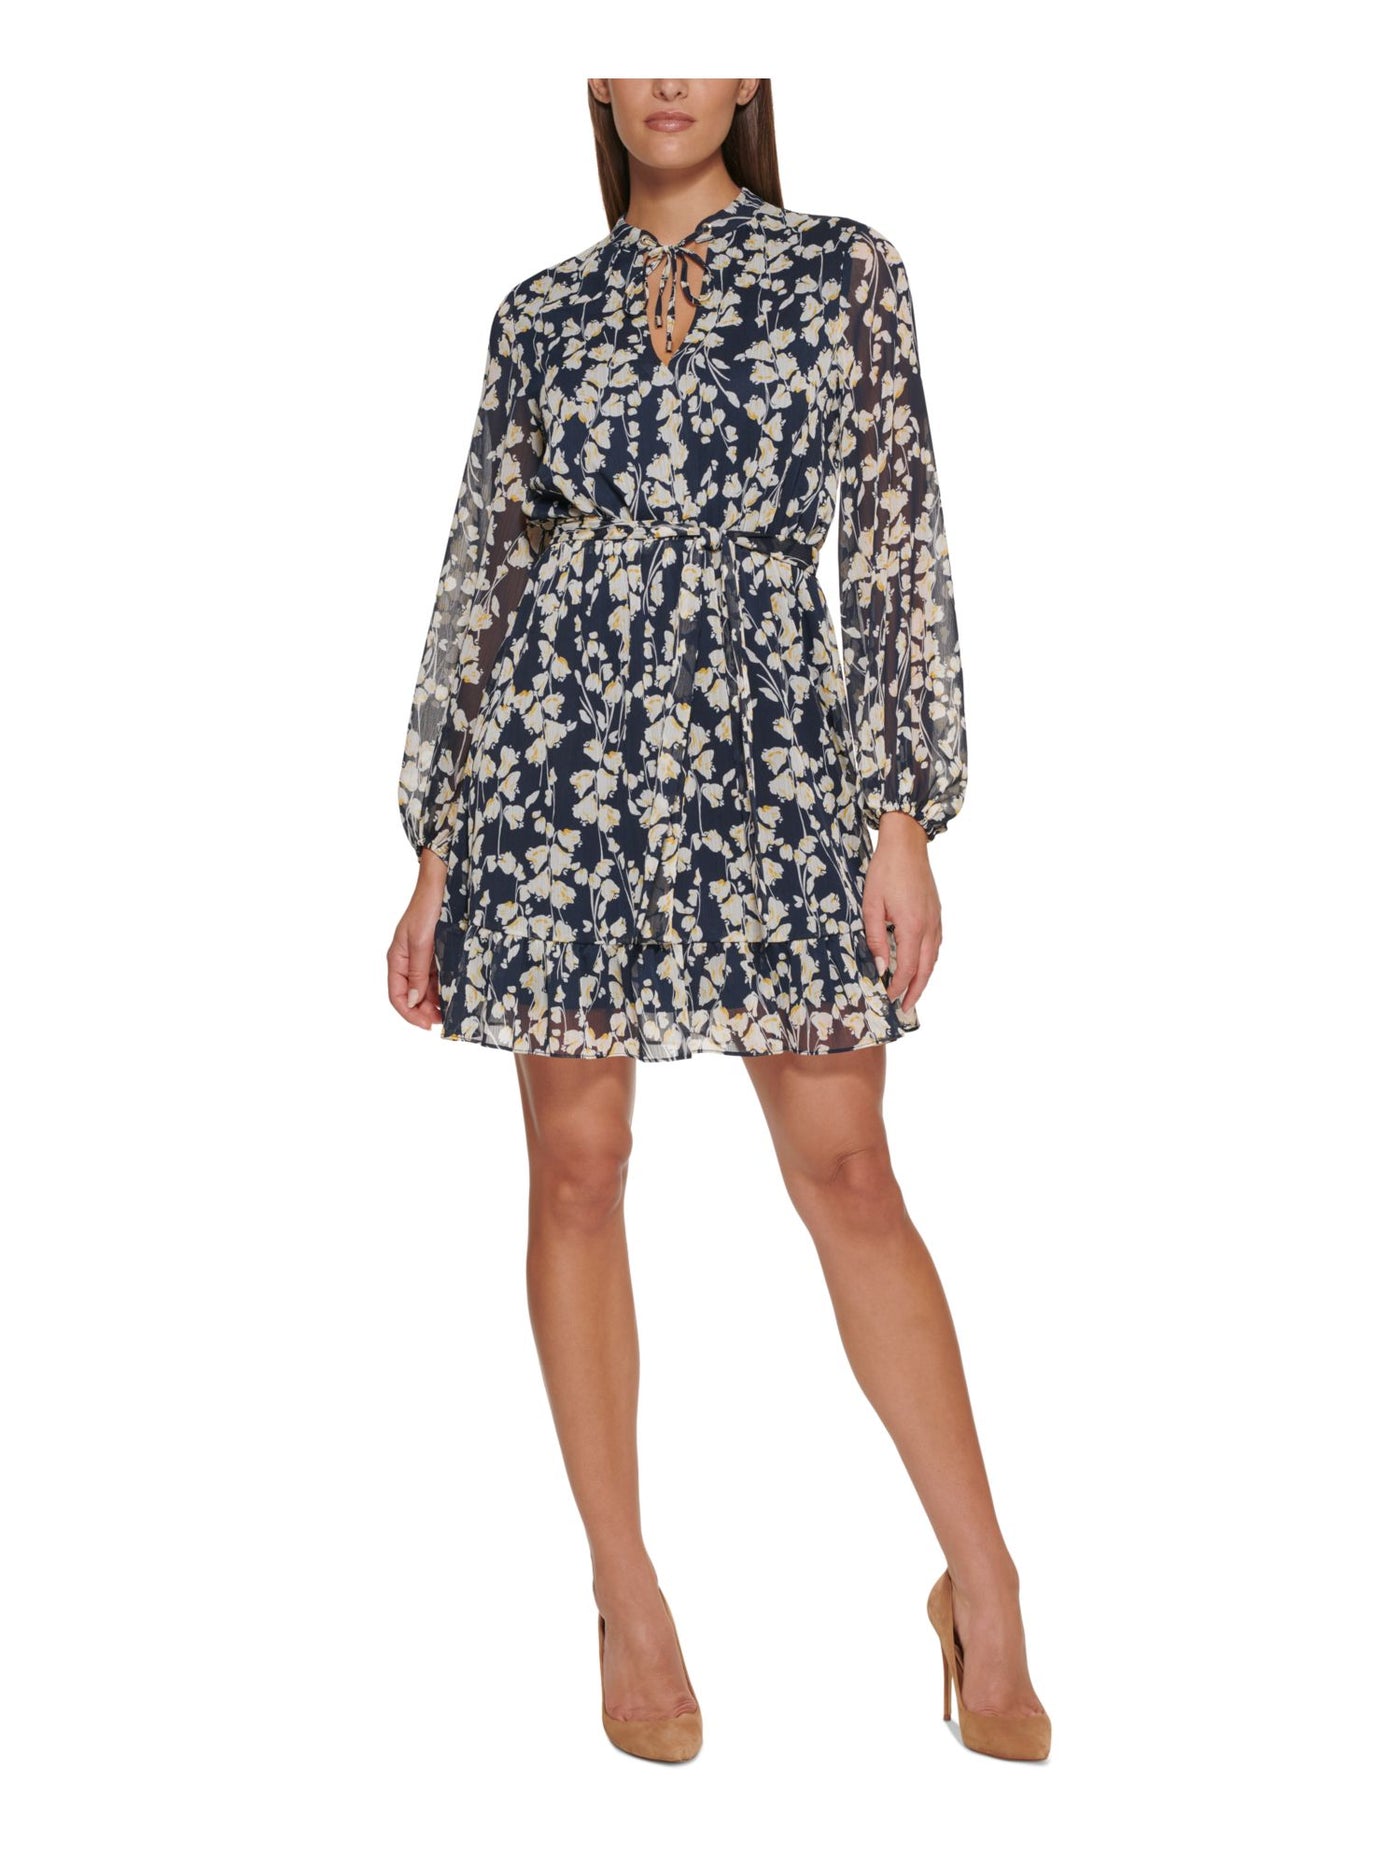 TOMMY HILFIGER Womens Navy Sheer Ruffled Lined Tie Belt Floral Long Sleeve Tie Neck Short Fit + Flare Dress 8